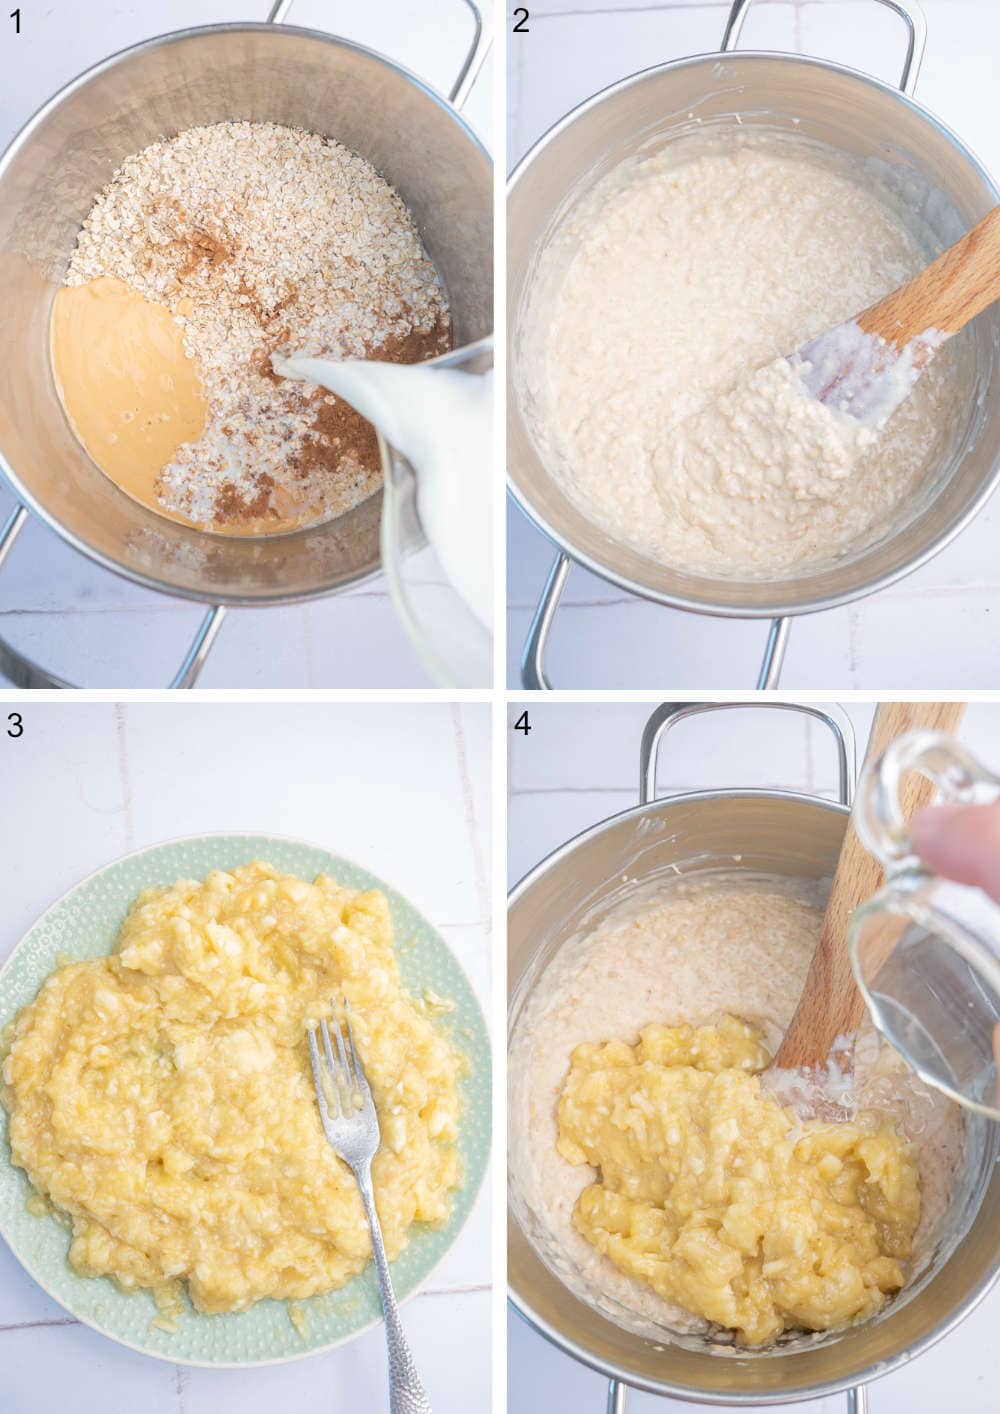 A collage of 4 photos showing how to make banana peanut butter oatmeal step by step.